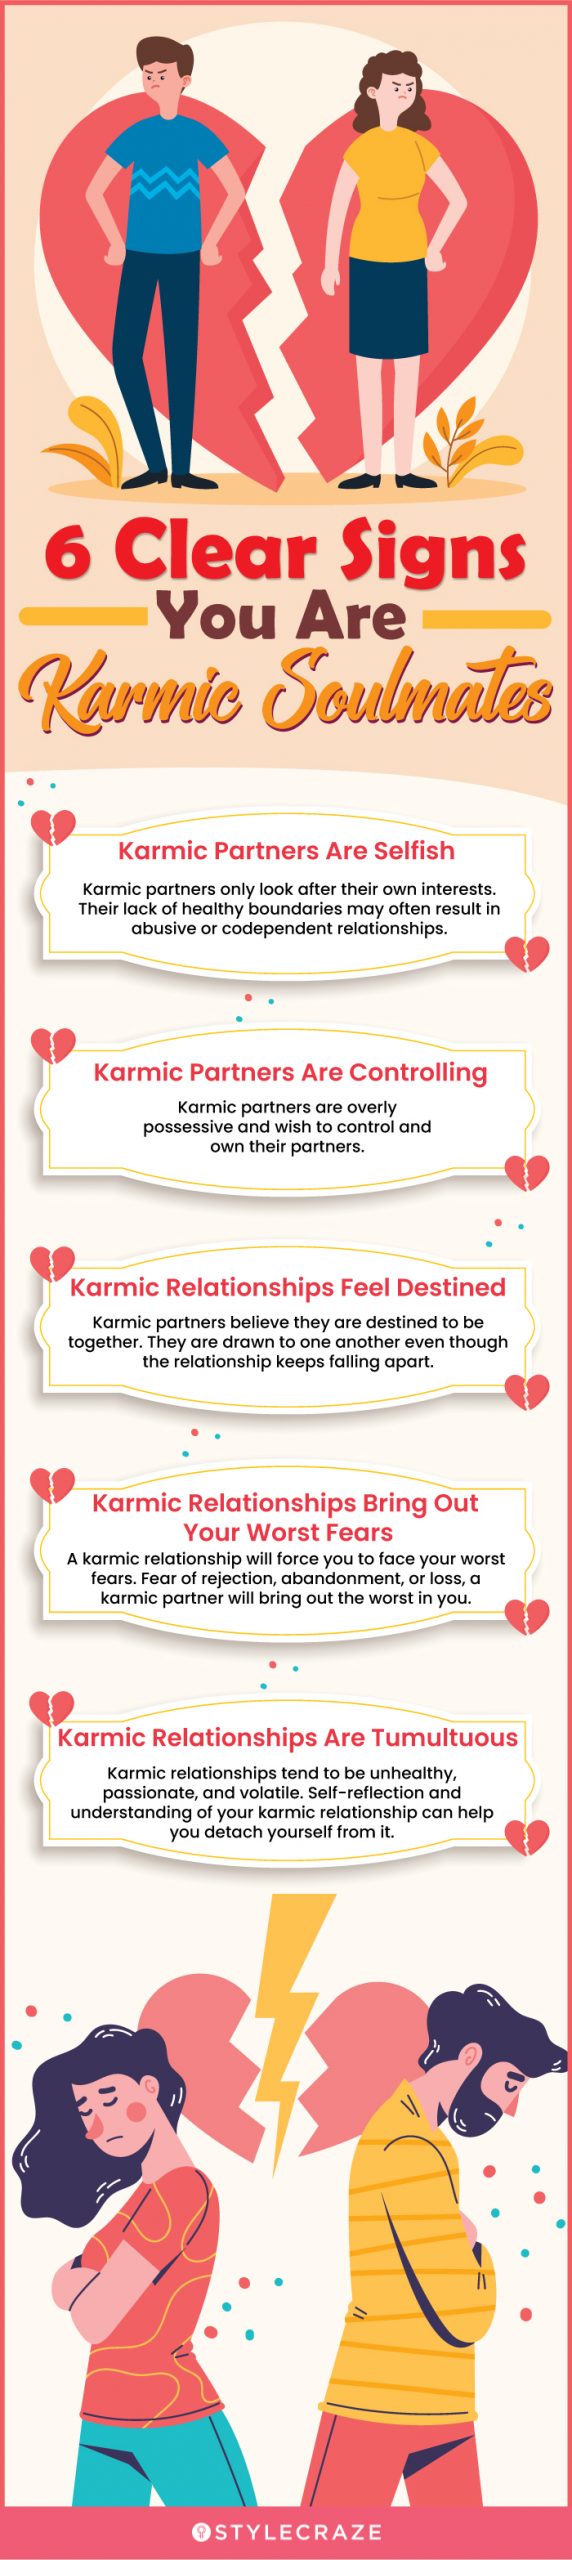 6 clear signs you are karmic soulmates [infographic]